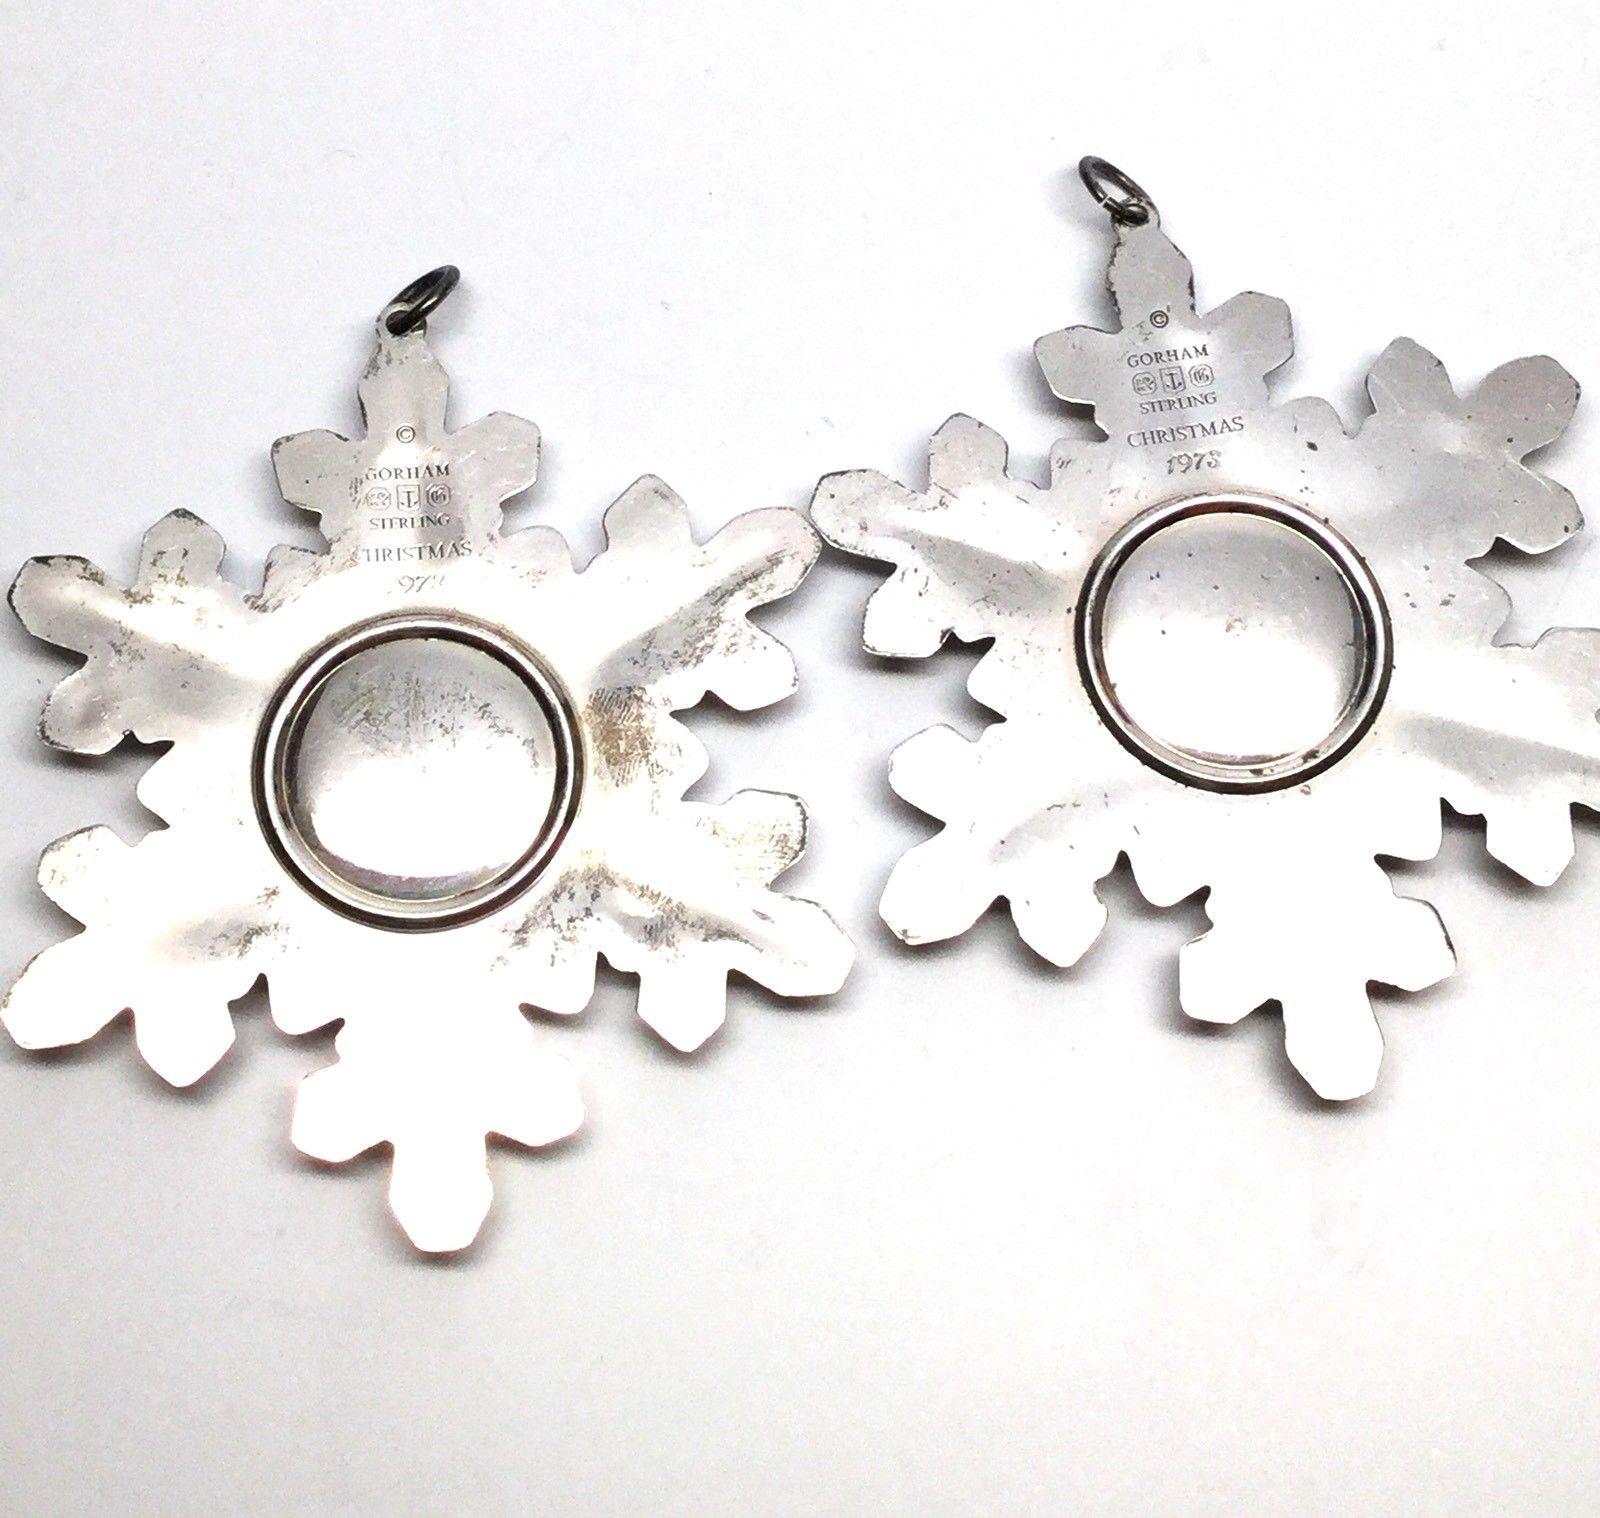 Two snowflake Christmas ornaments. These two vintage 1973 Gorham sterling silver snowflake Christmas ornaments are a beautiful addition for your collection! Measurements: 3 3/8